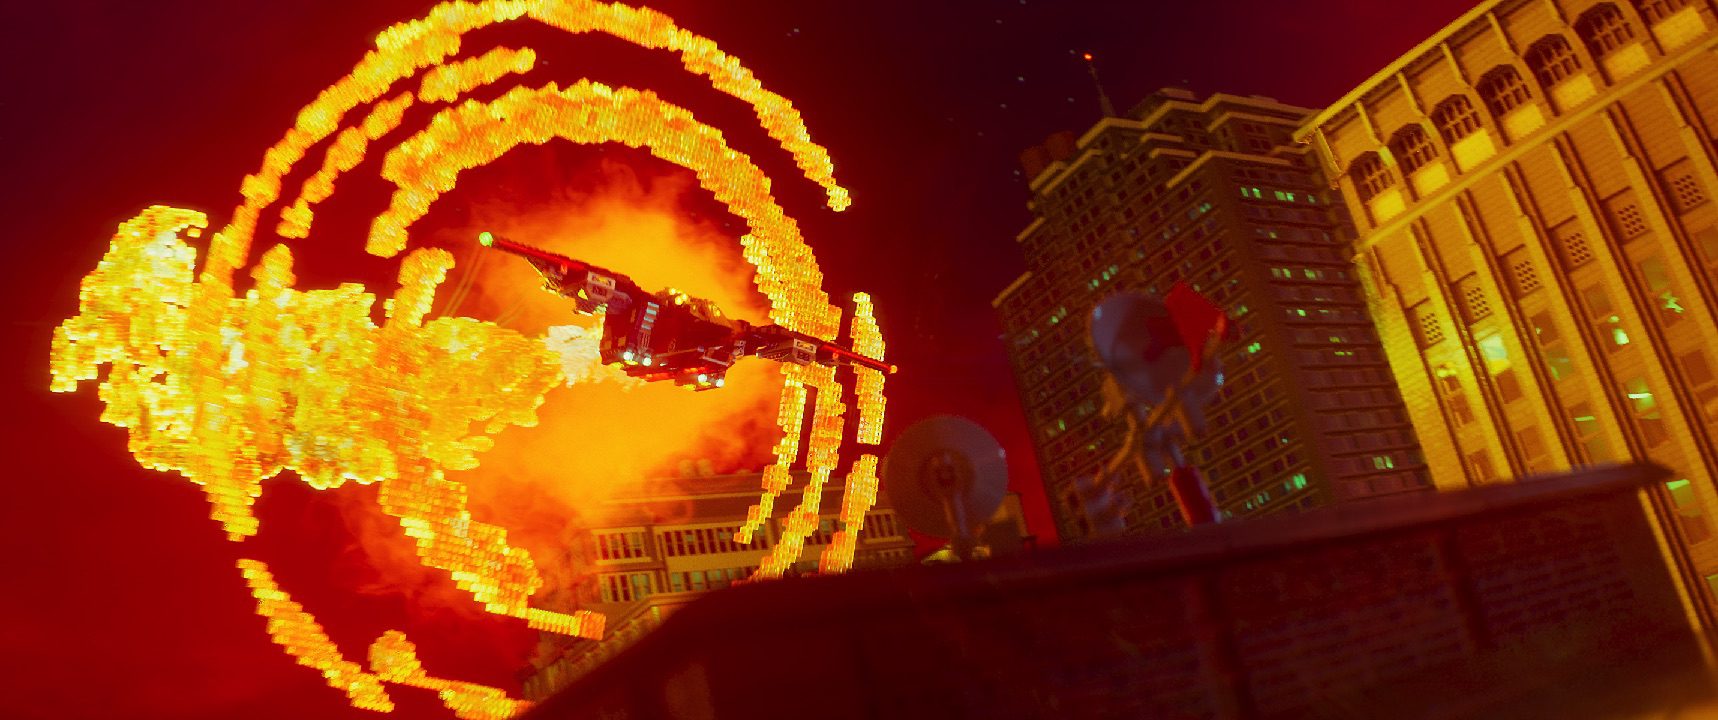 Lego explosions in The Lego Batman Movie. (Warner Bros Pictures)